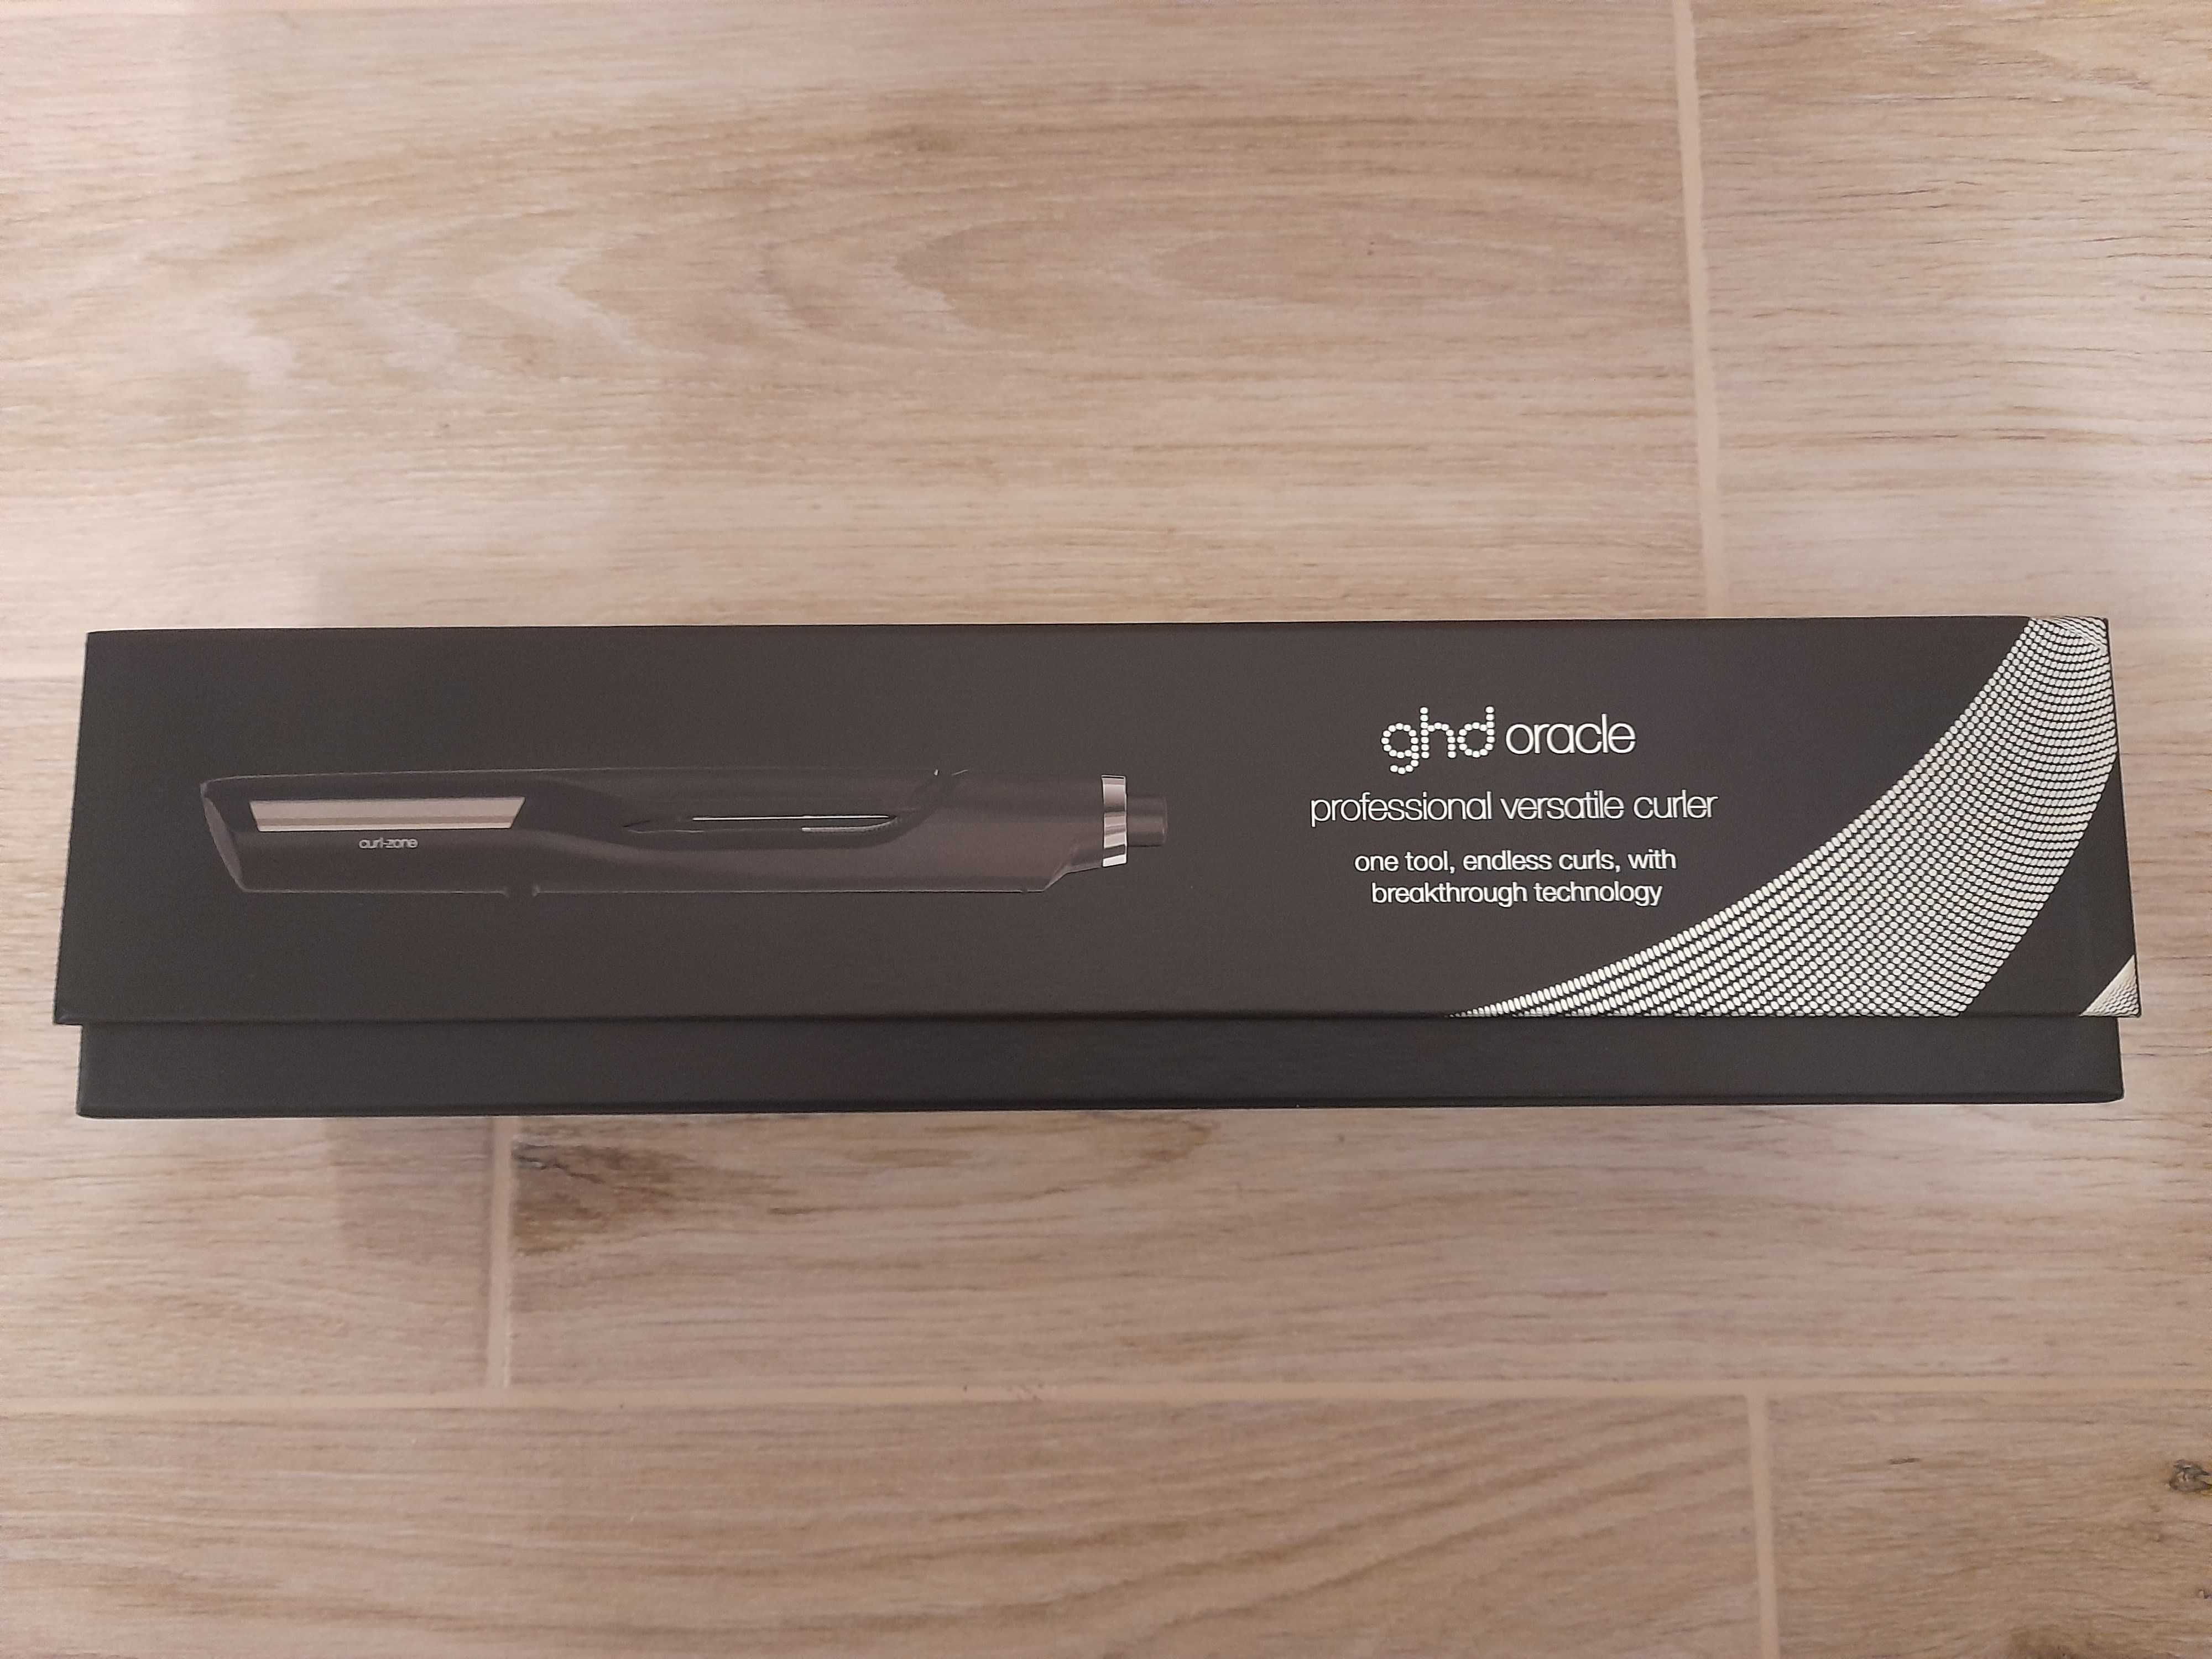 ghd oracle professional versatile curler - falownica do wlosow